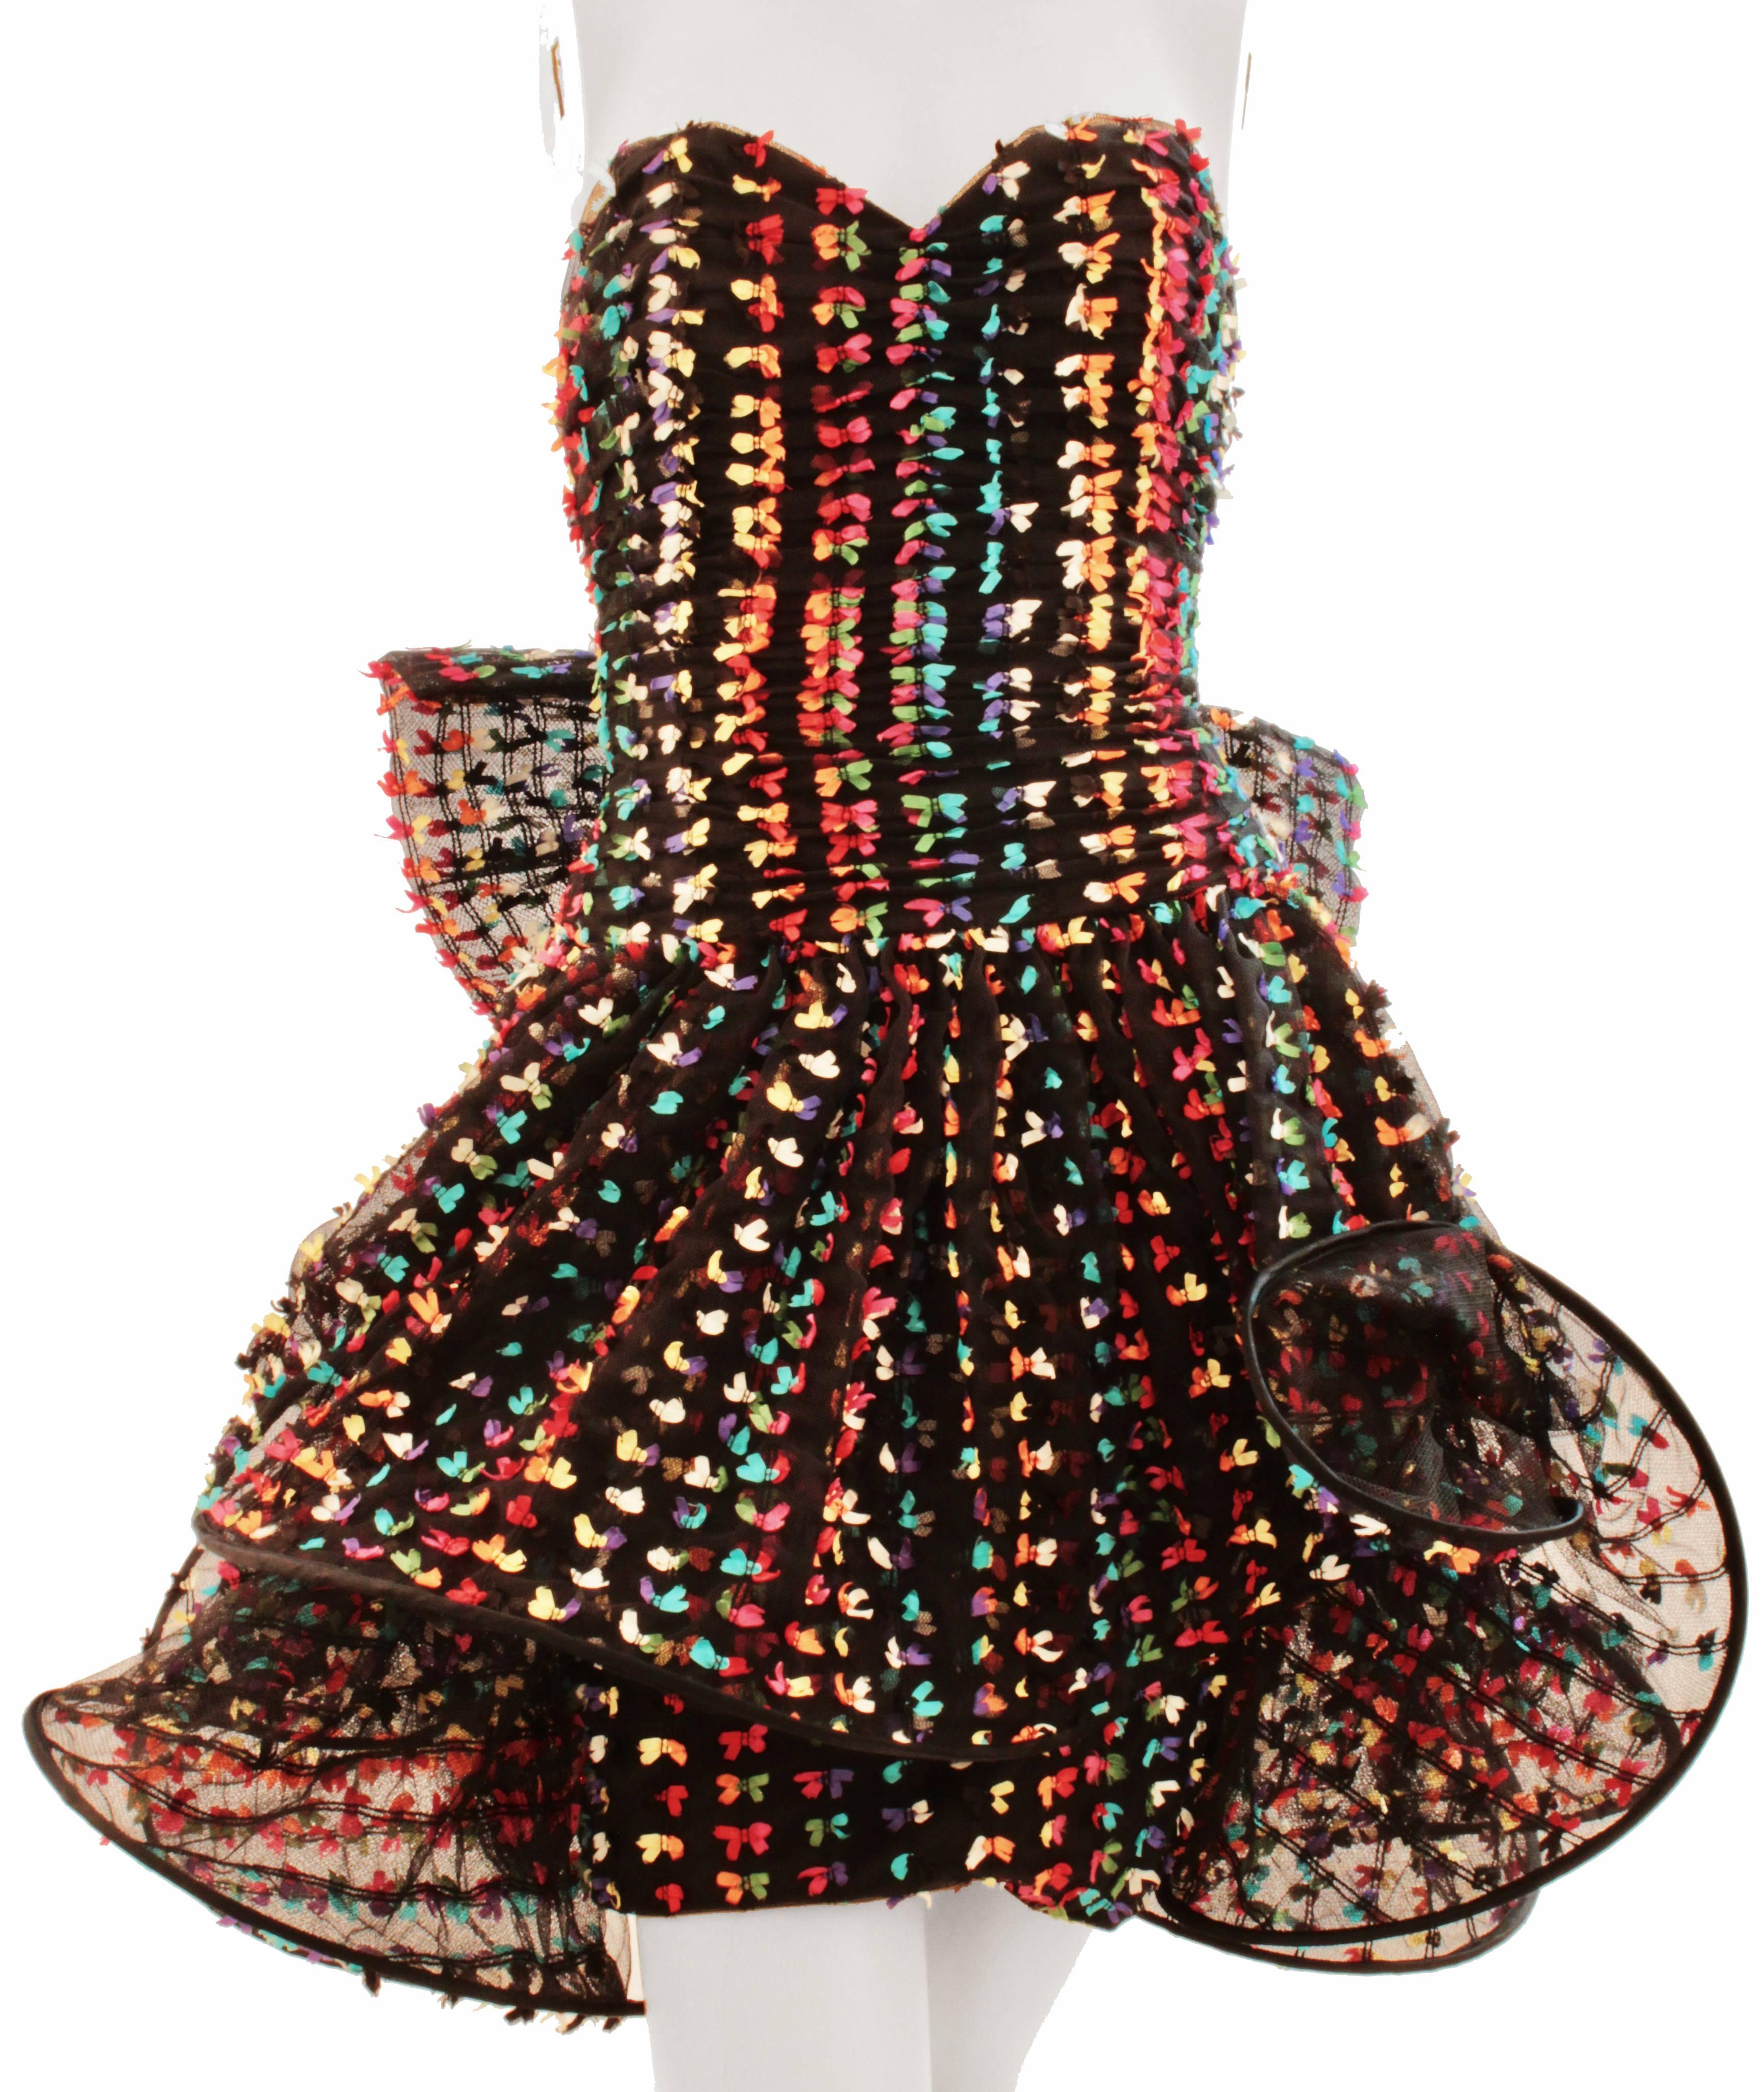 This little cocktail dress was made by London designer Tomasz Starzewski, likely in the late 1990s.  Made from a black cotton blend mesh fabric, it features dozens of tiny confetti colored bows with a pliable hooped layer overlay at the skirt.